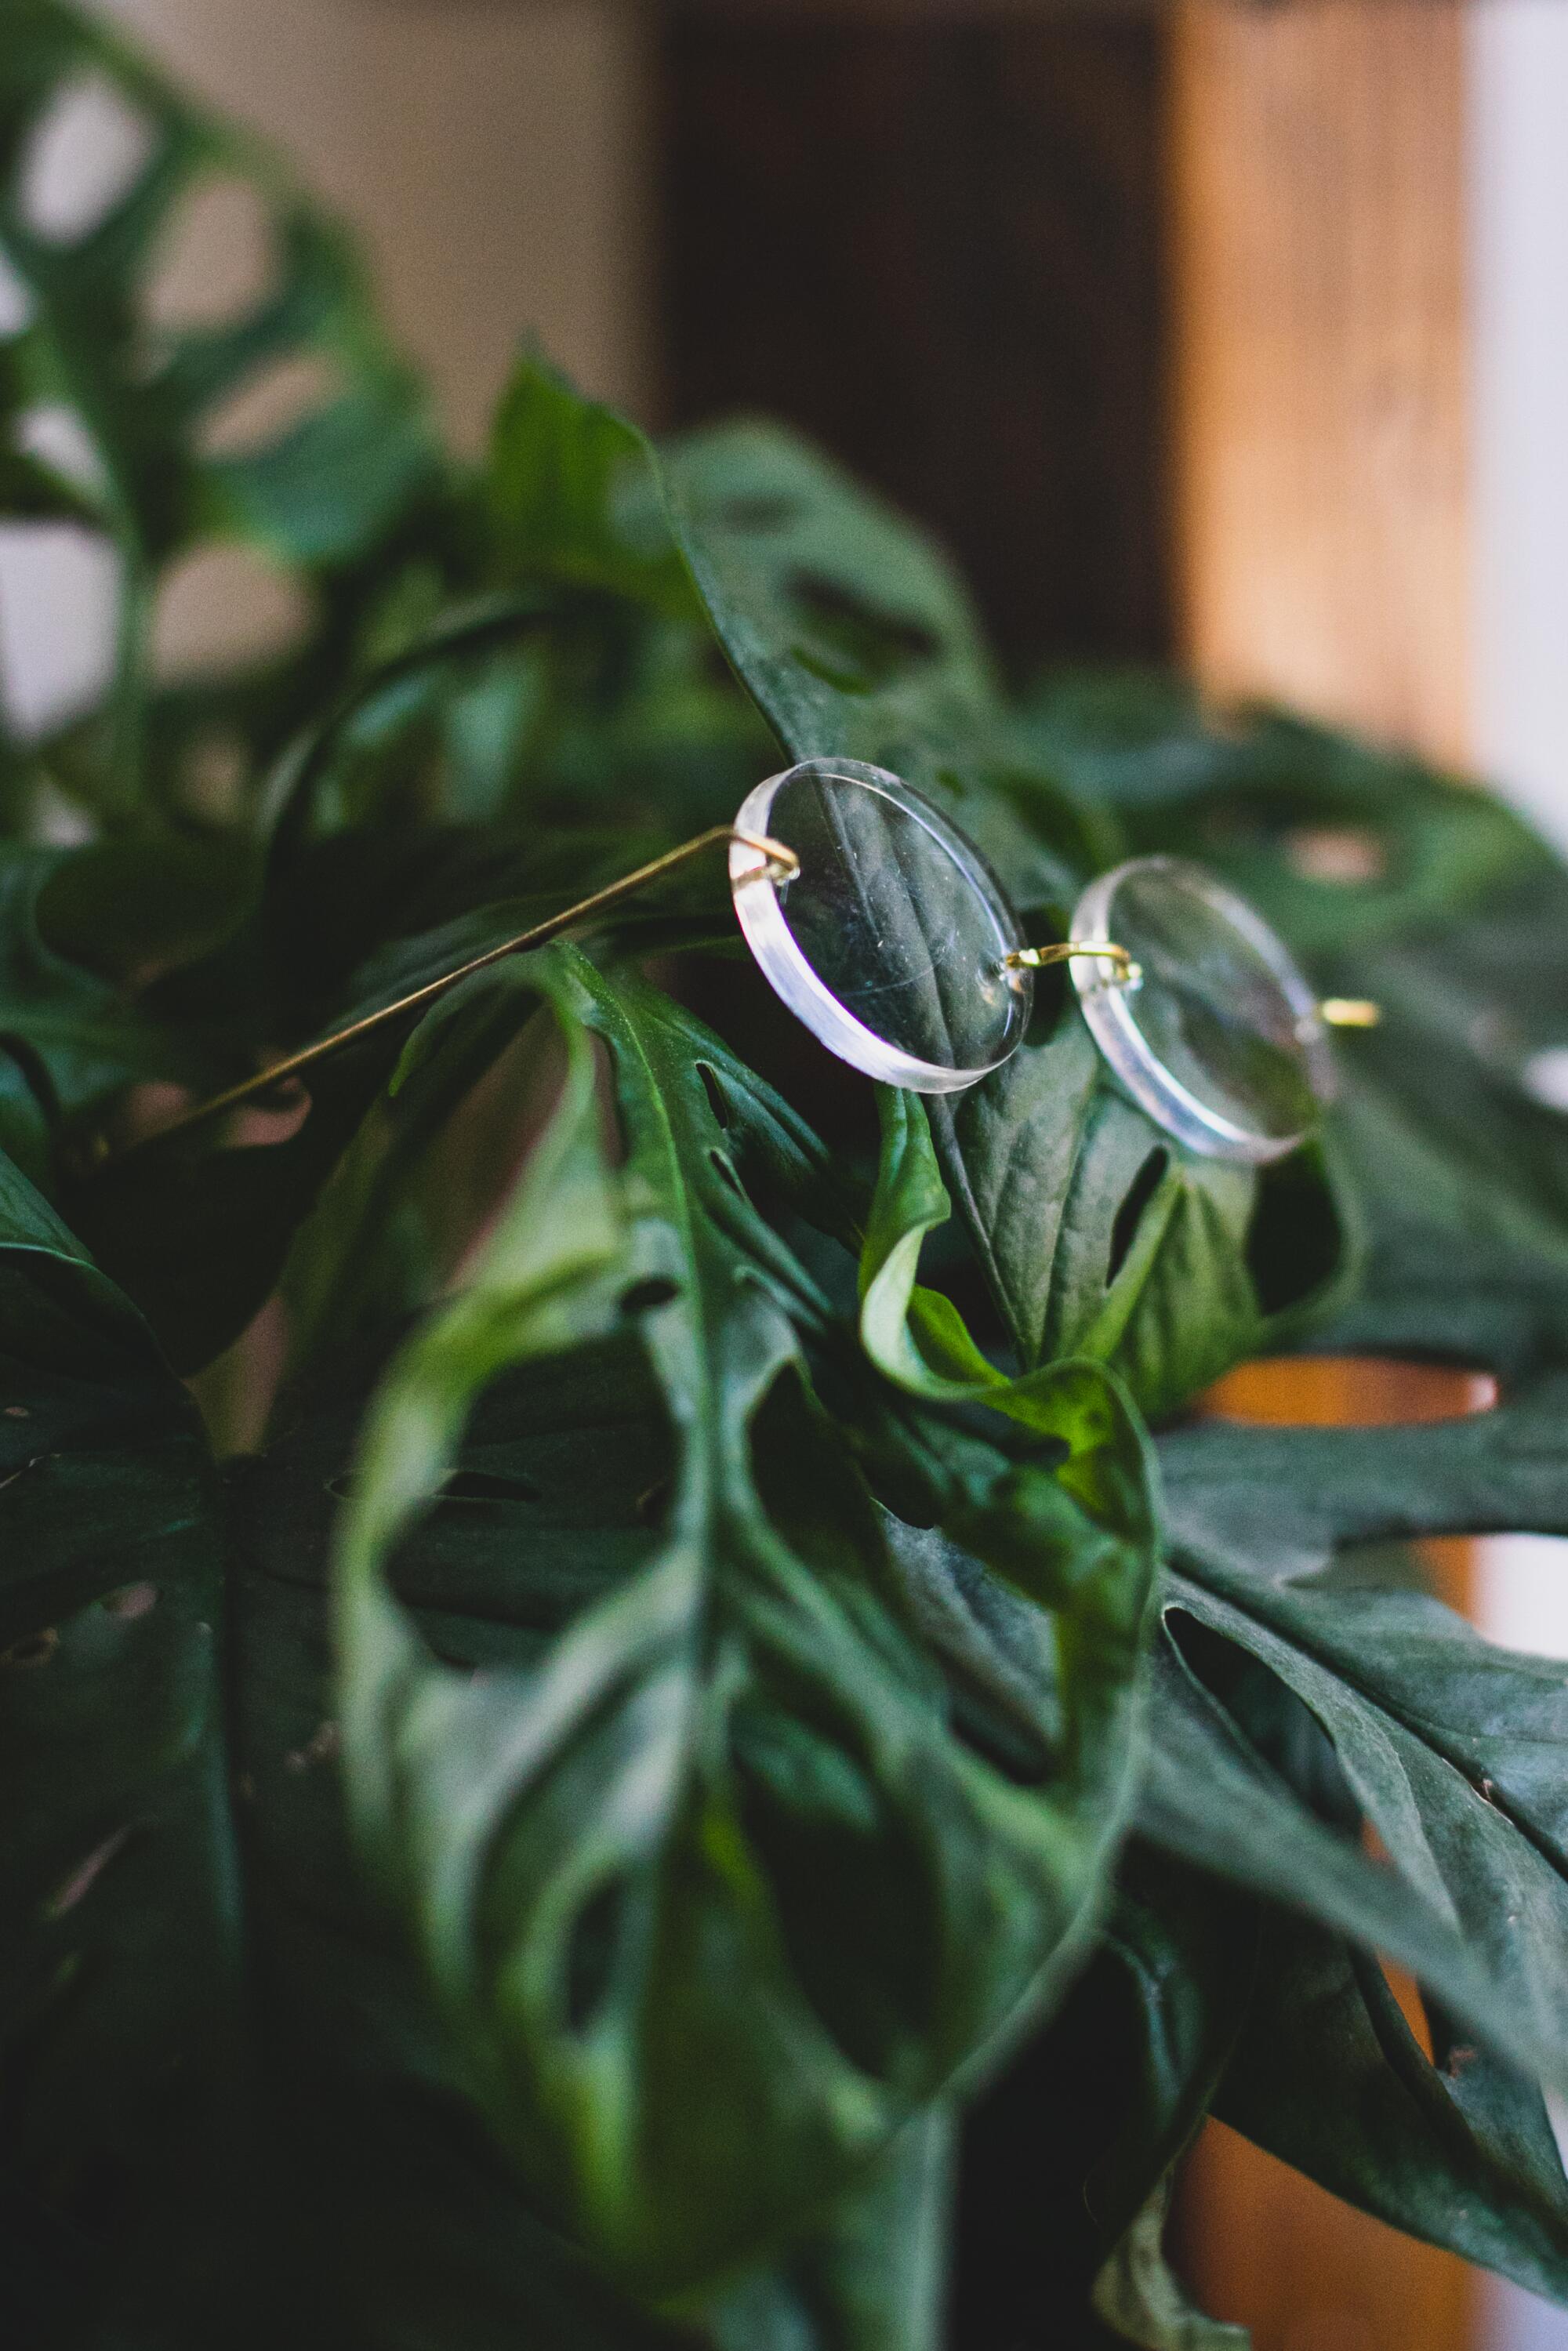 A pair of glasses sits on the leaves of a green plant.